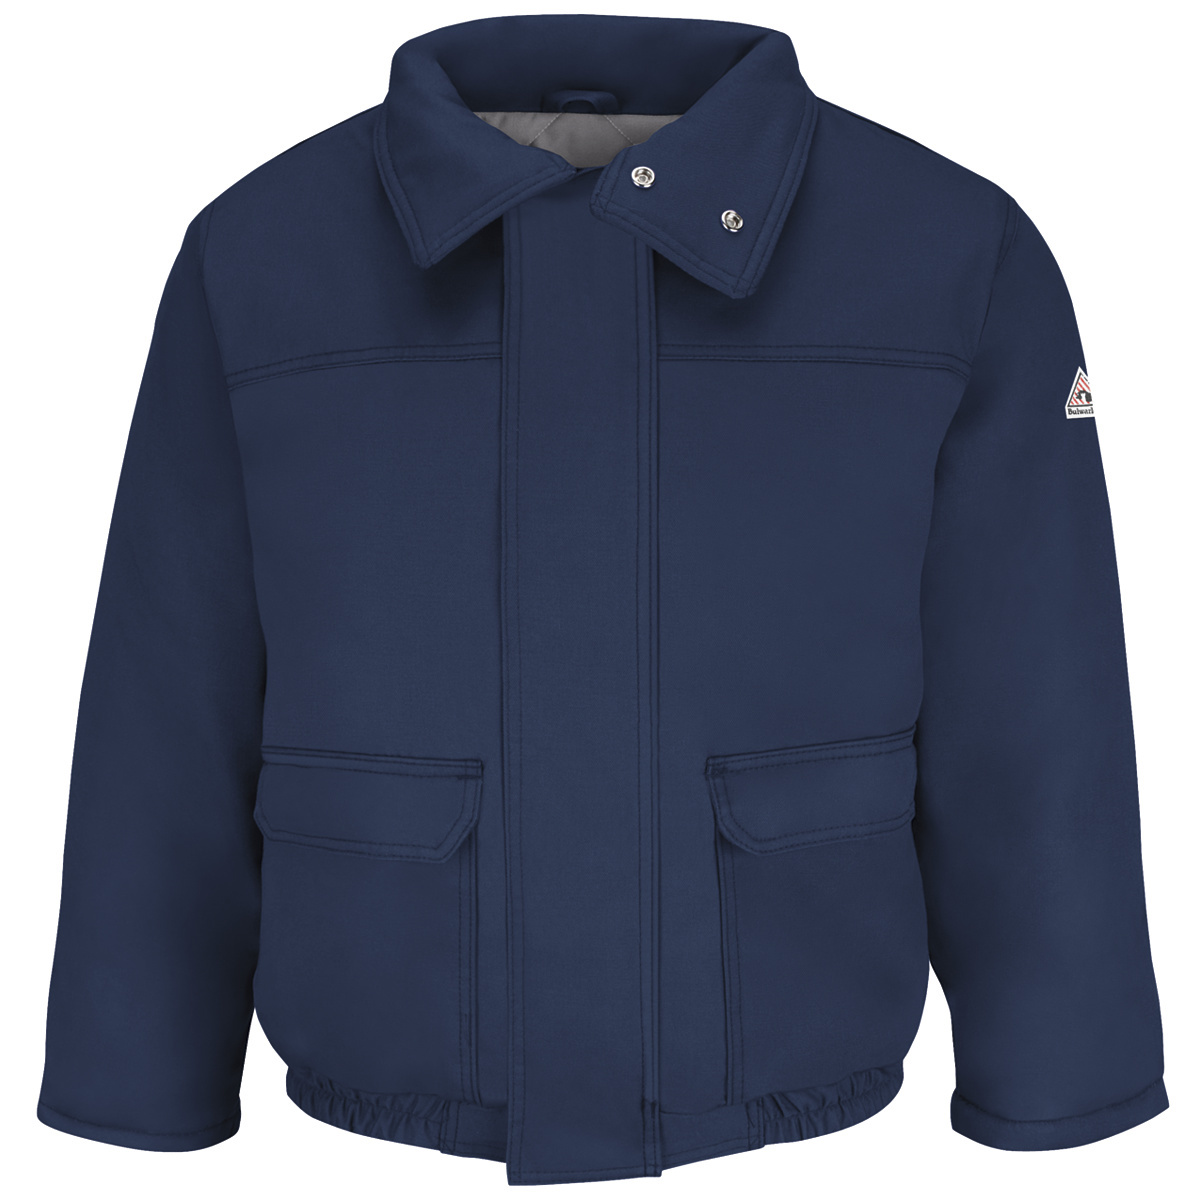 Bulwark® X-Large Regular Navy Blue Westex Ultrasoft® Twill/Cotton/Nylon Water Repellent Flame Resistant Jacket With Cotton Linin